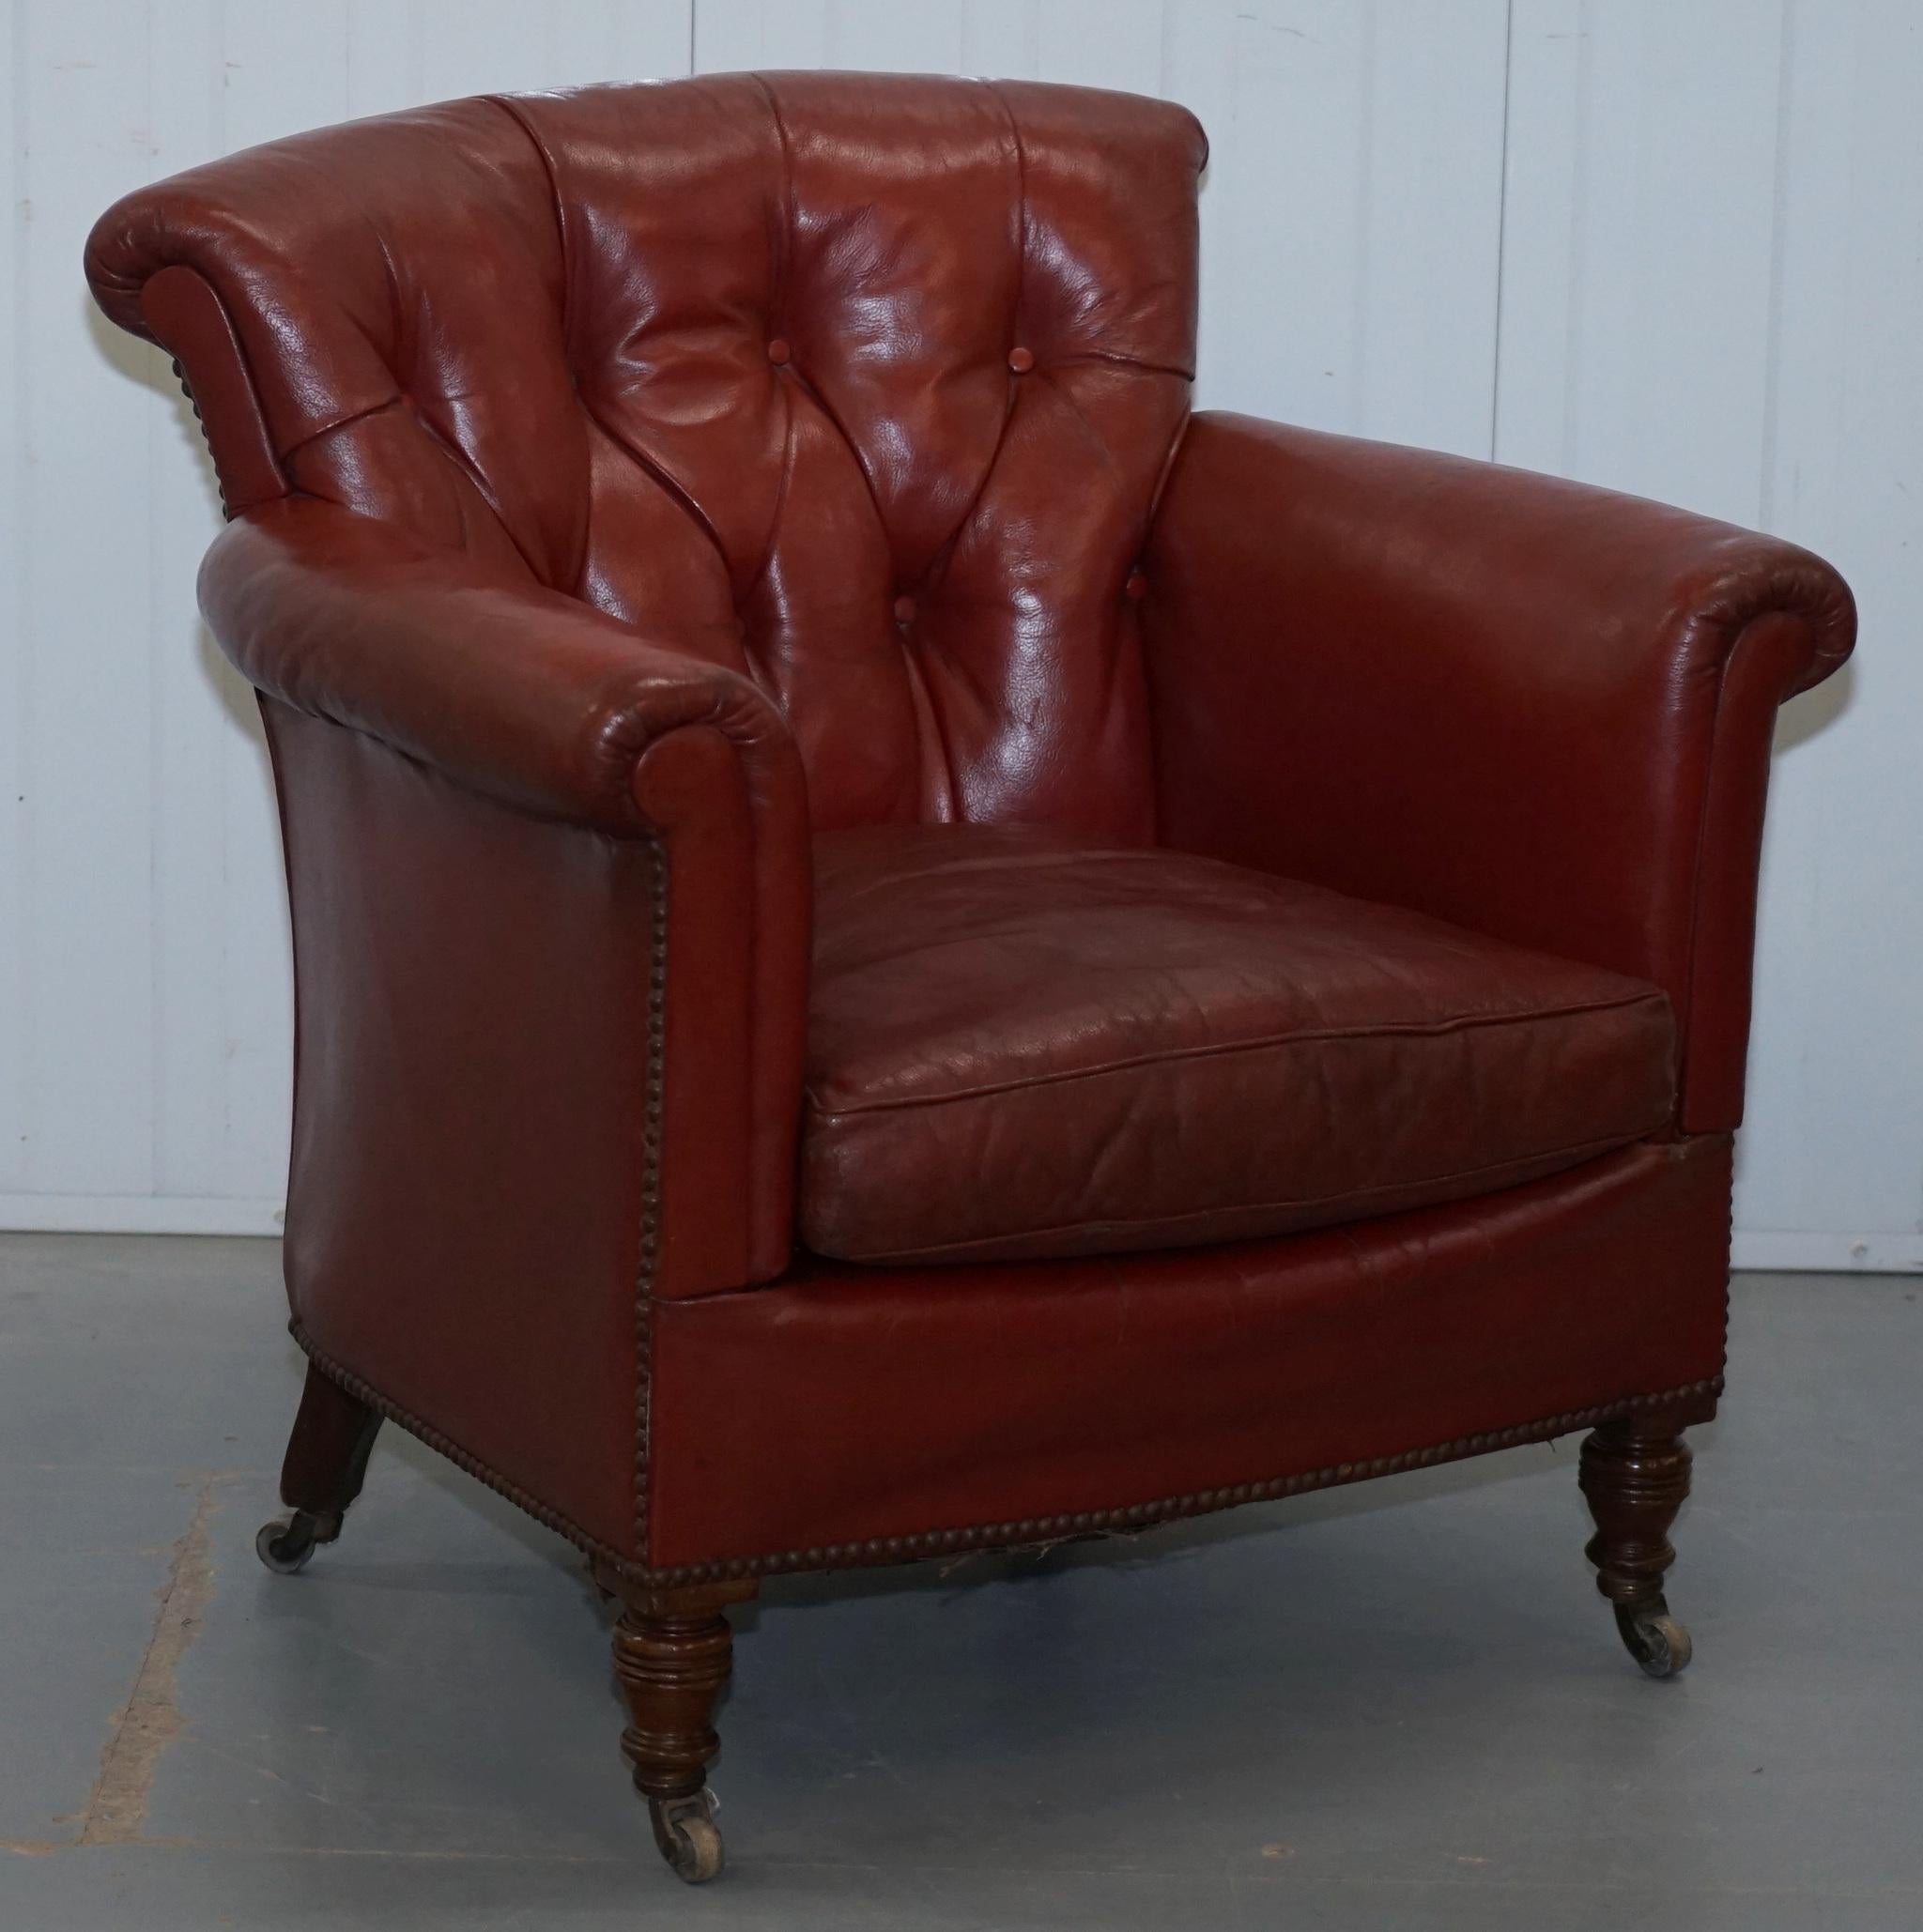 We are delighted to offer for sale this once in a lifetime opportunity to own the great Sir Rod Stewart's pair of original Howard & Sons fully stamped with original castors Victorian blood red leather club tub armchairs.

Never again will you be